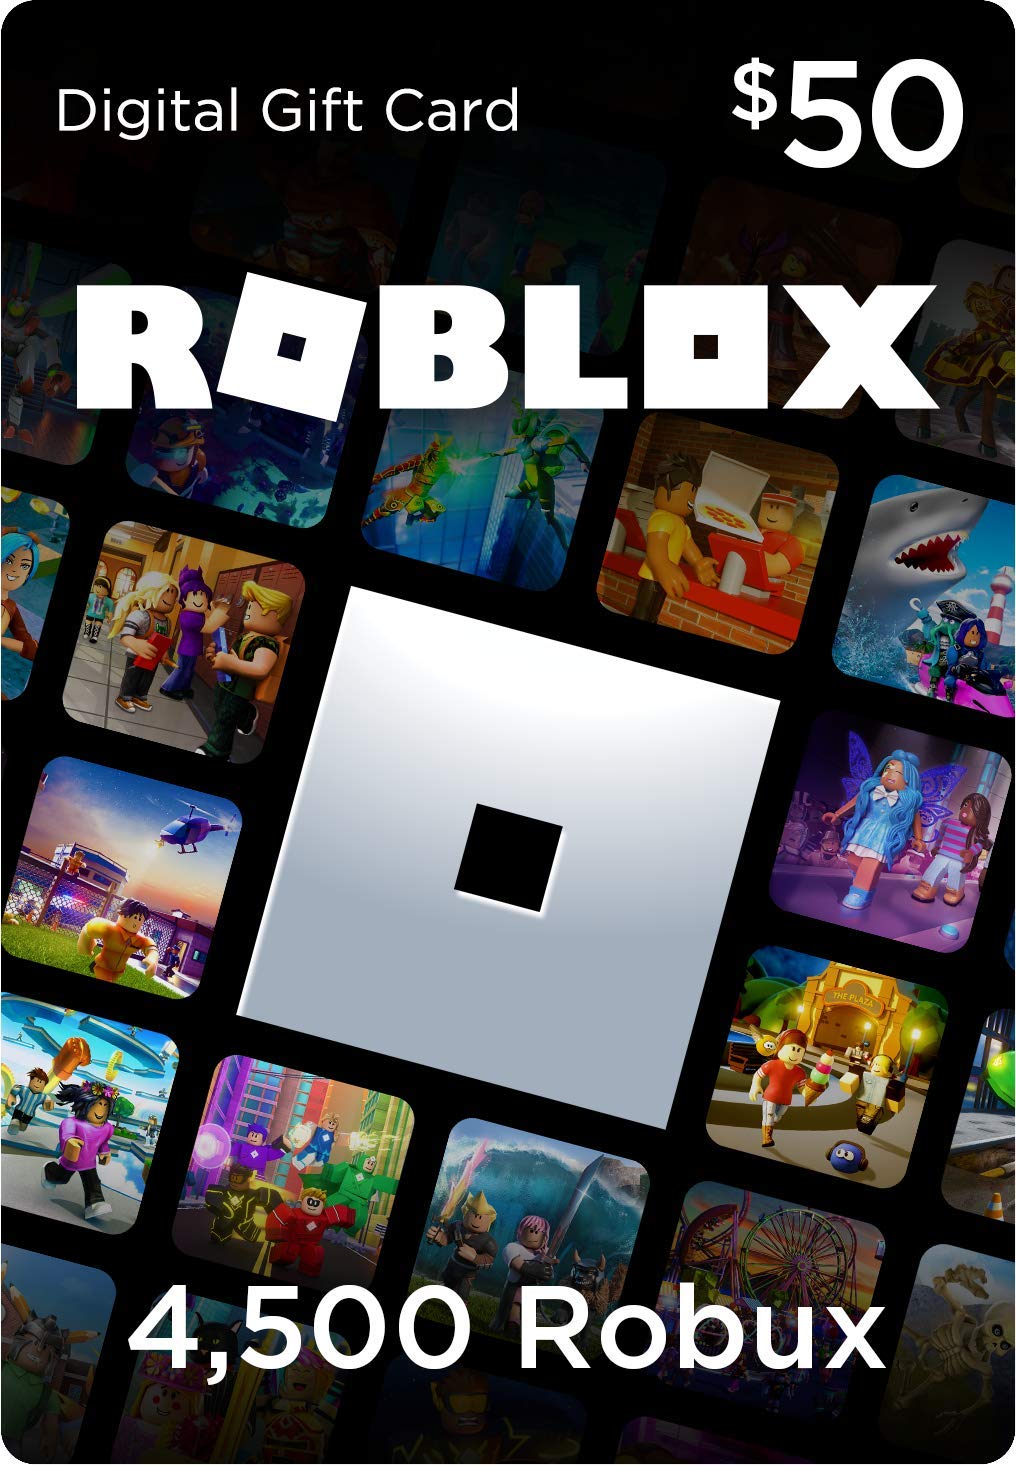 Roblox Gift Card - 4500 Robux [Includes Exclusive Virtual Item] [Online Game Code]-44.99$ $44.99